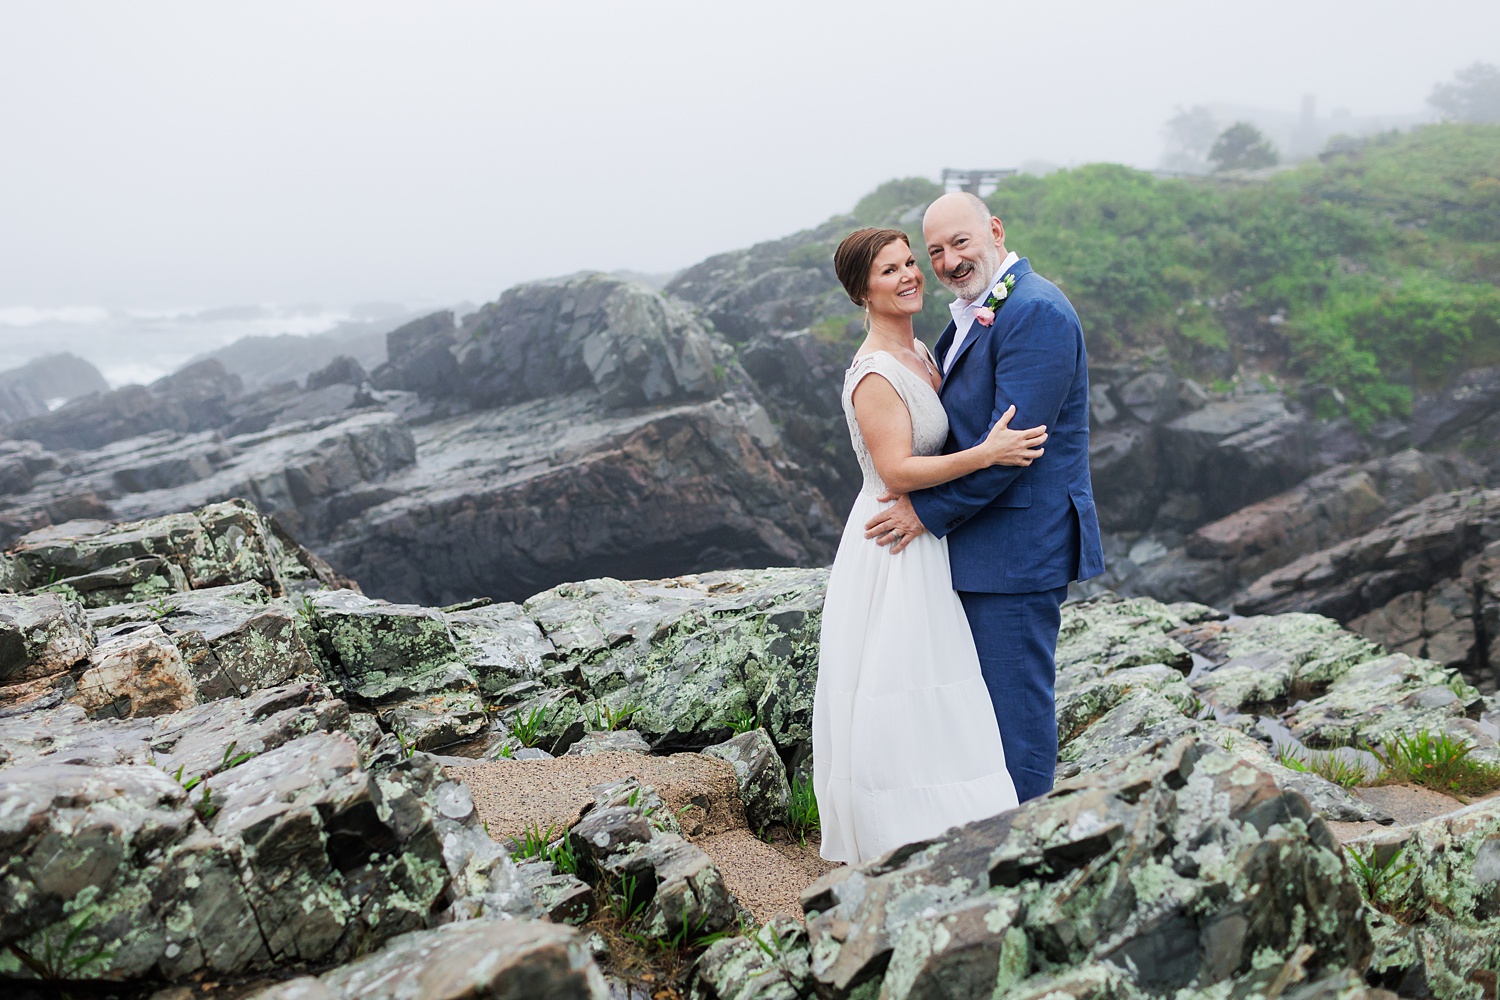 The couple smiles big on the rocks at Marginal Way Maine in Ogunquit after eloping